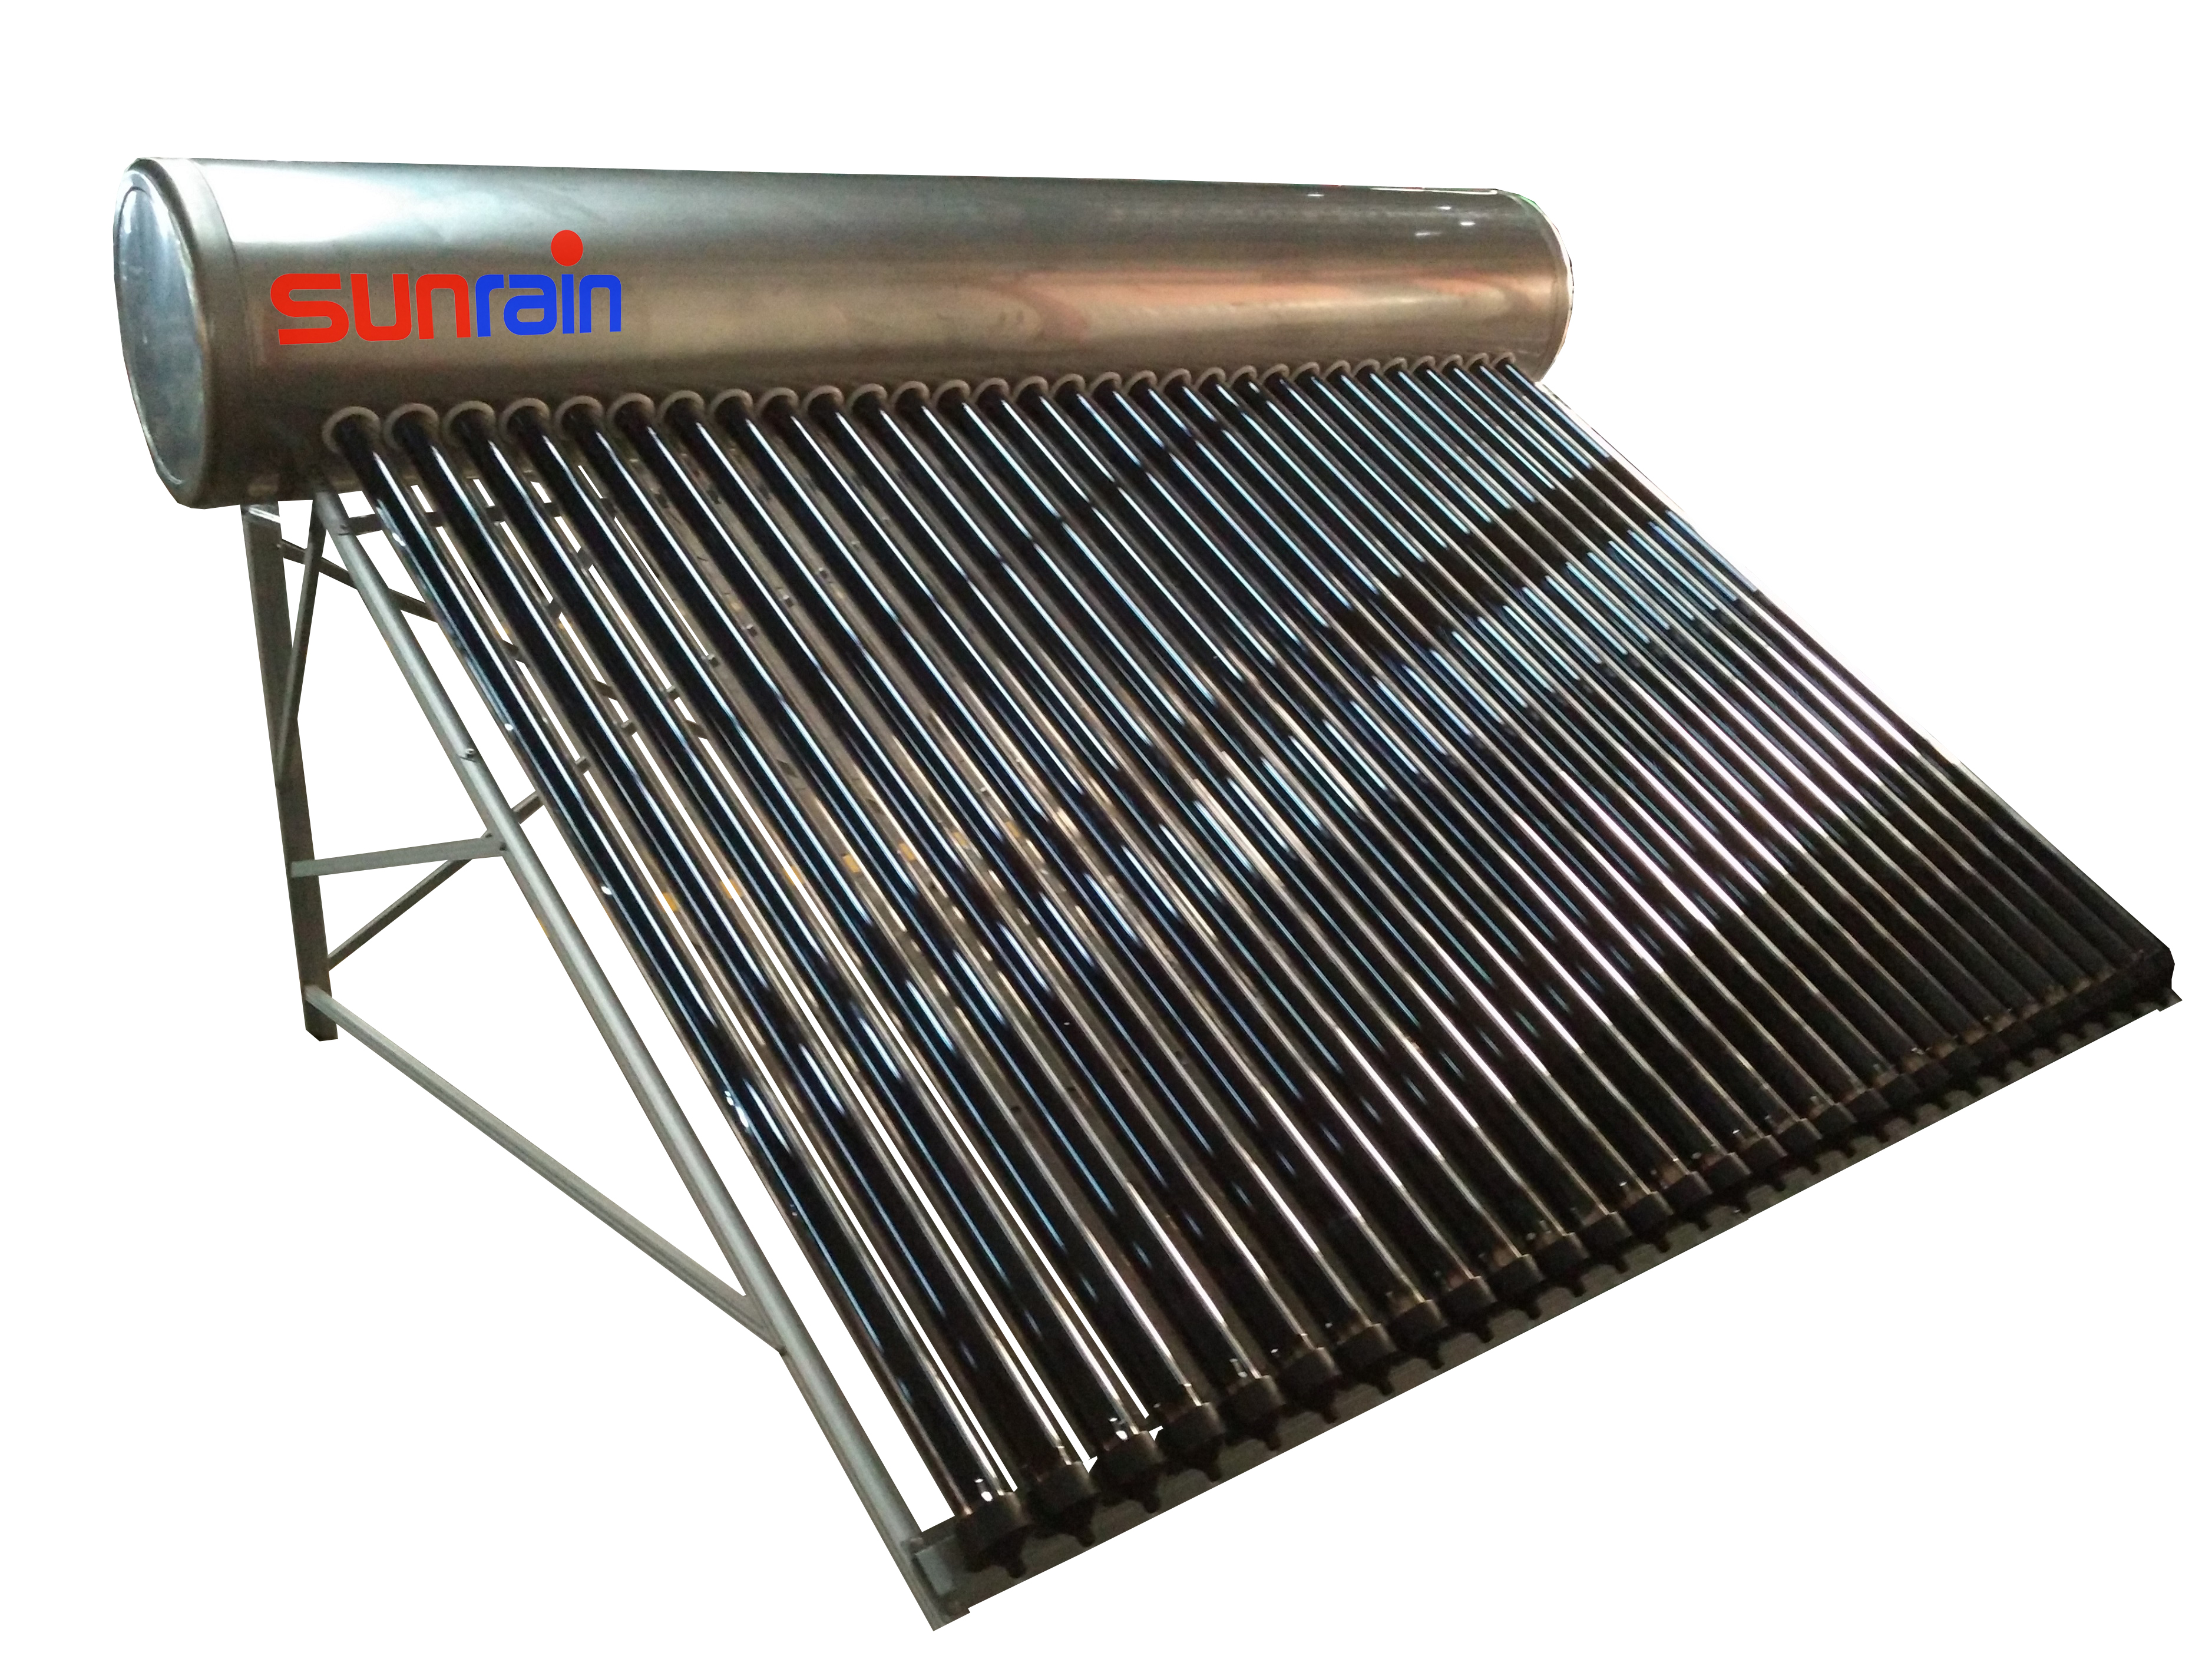 Stainless Steel  Compact Solar Hot Water Heater- 80 Gallon solar hot water tank